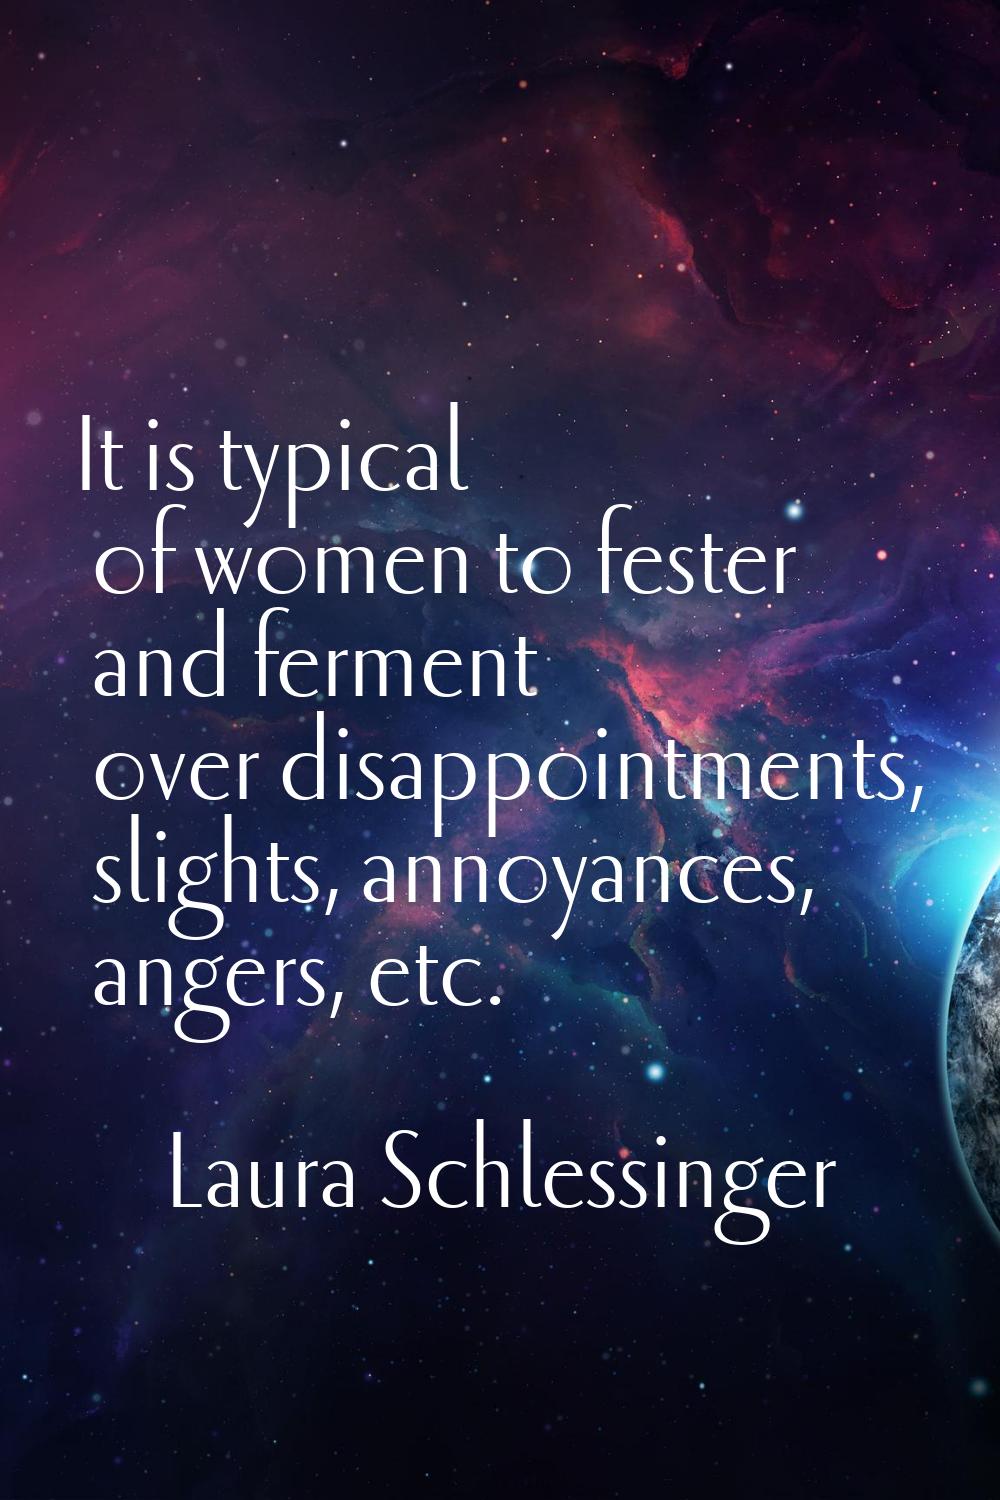 It is typical of women to fester and ferment over disappointments, slights, annoyances, angers, etc